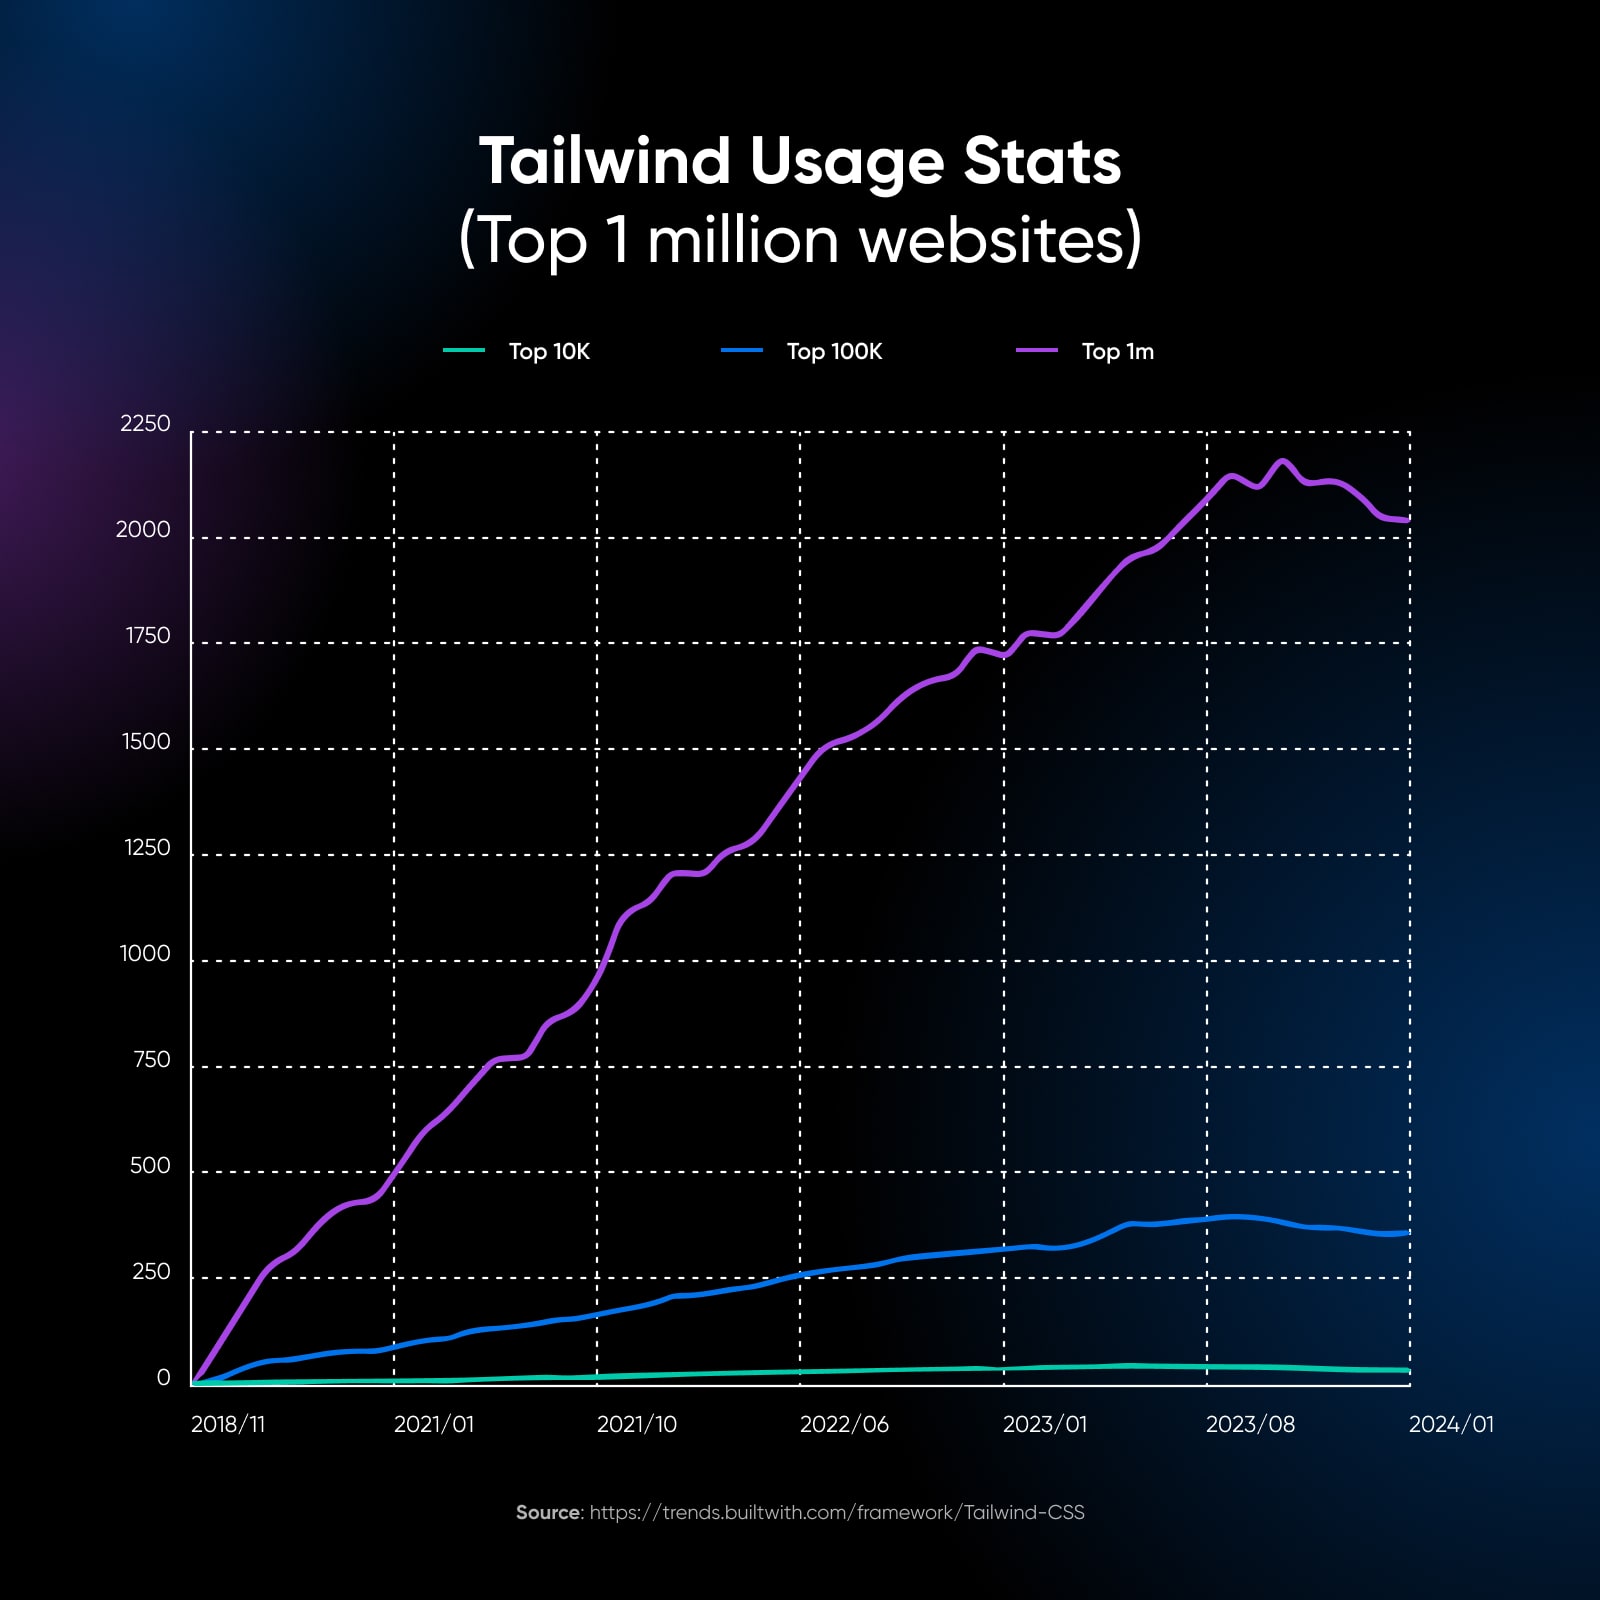 Tailwind Usage Stats of the top 1 million websites with a chart showing Tailwind growth.